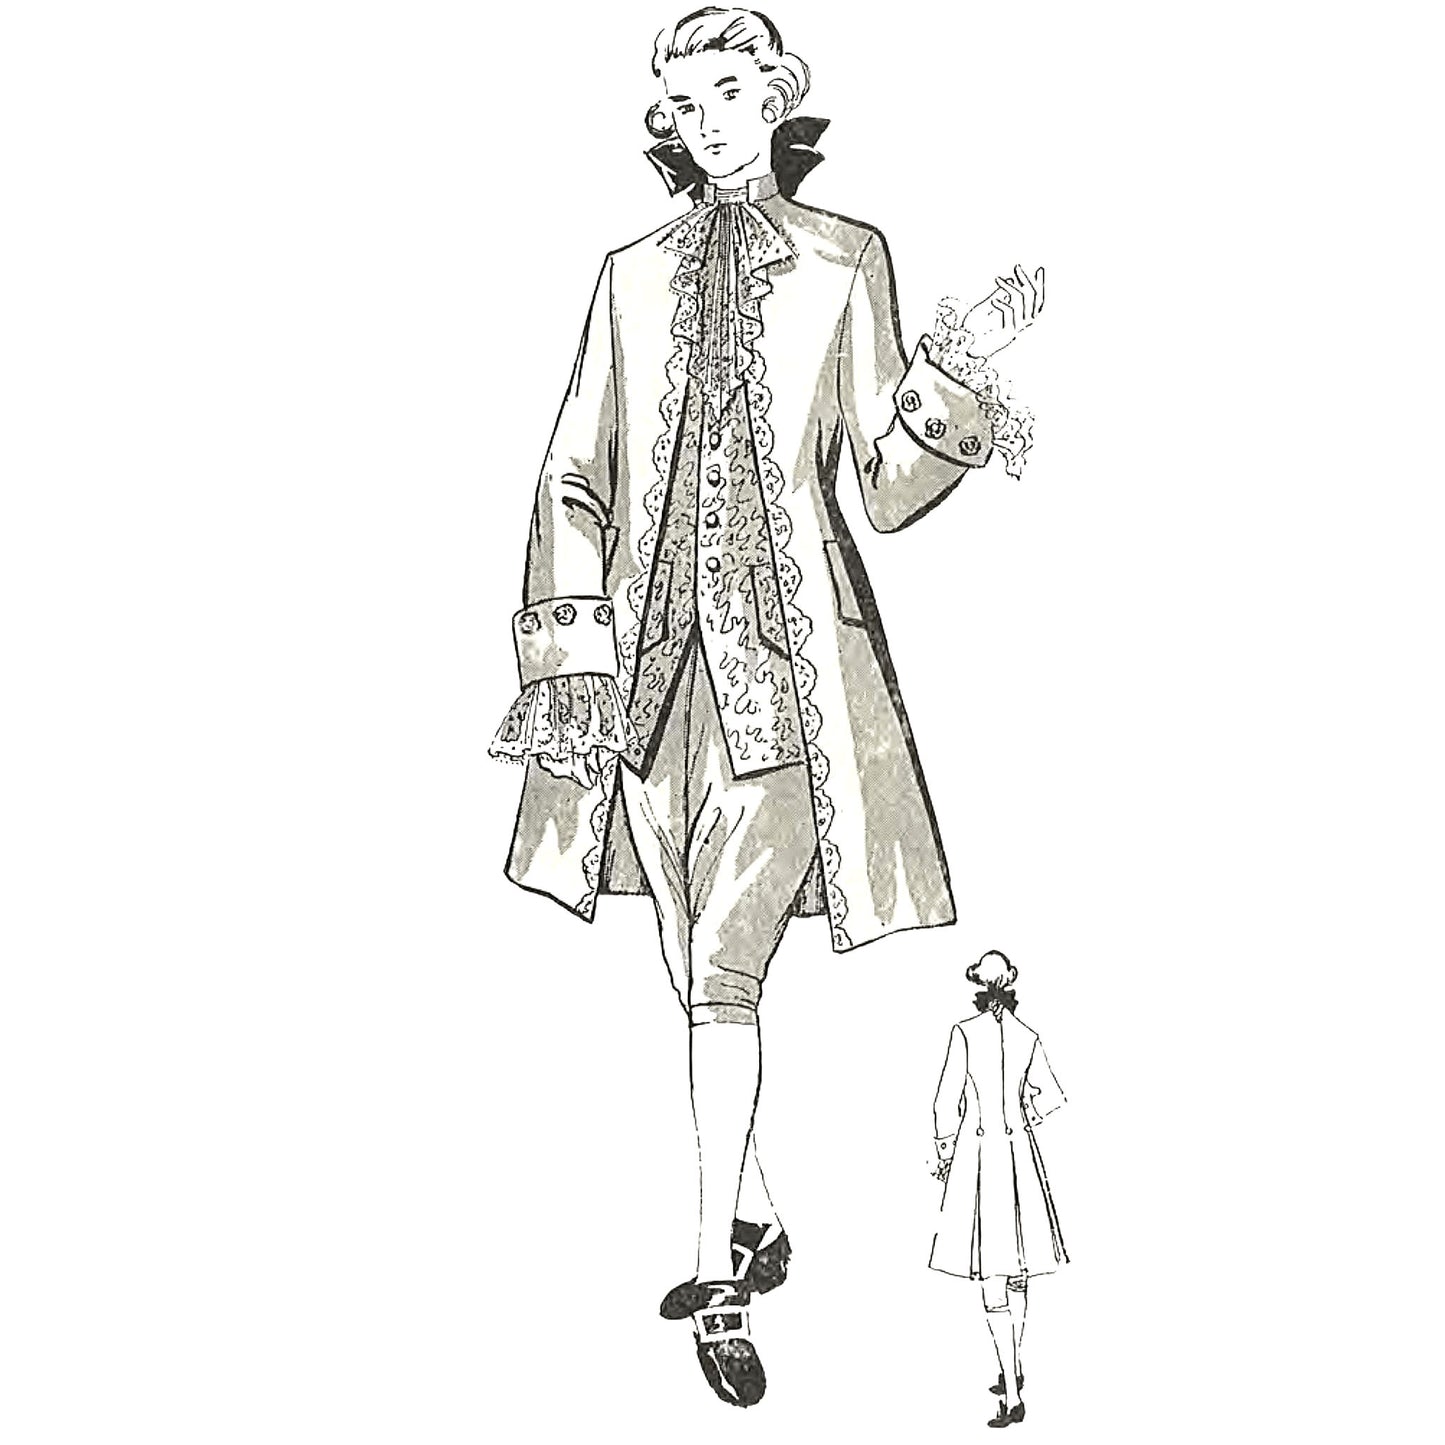 Image of man wearing breeches